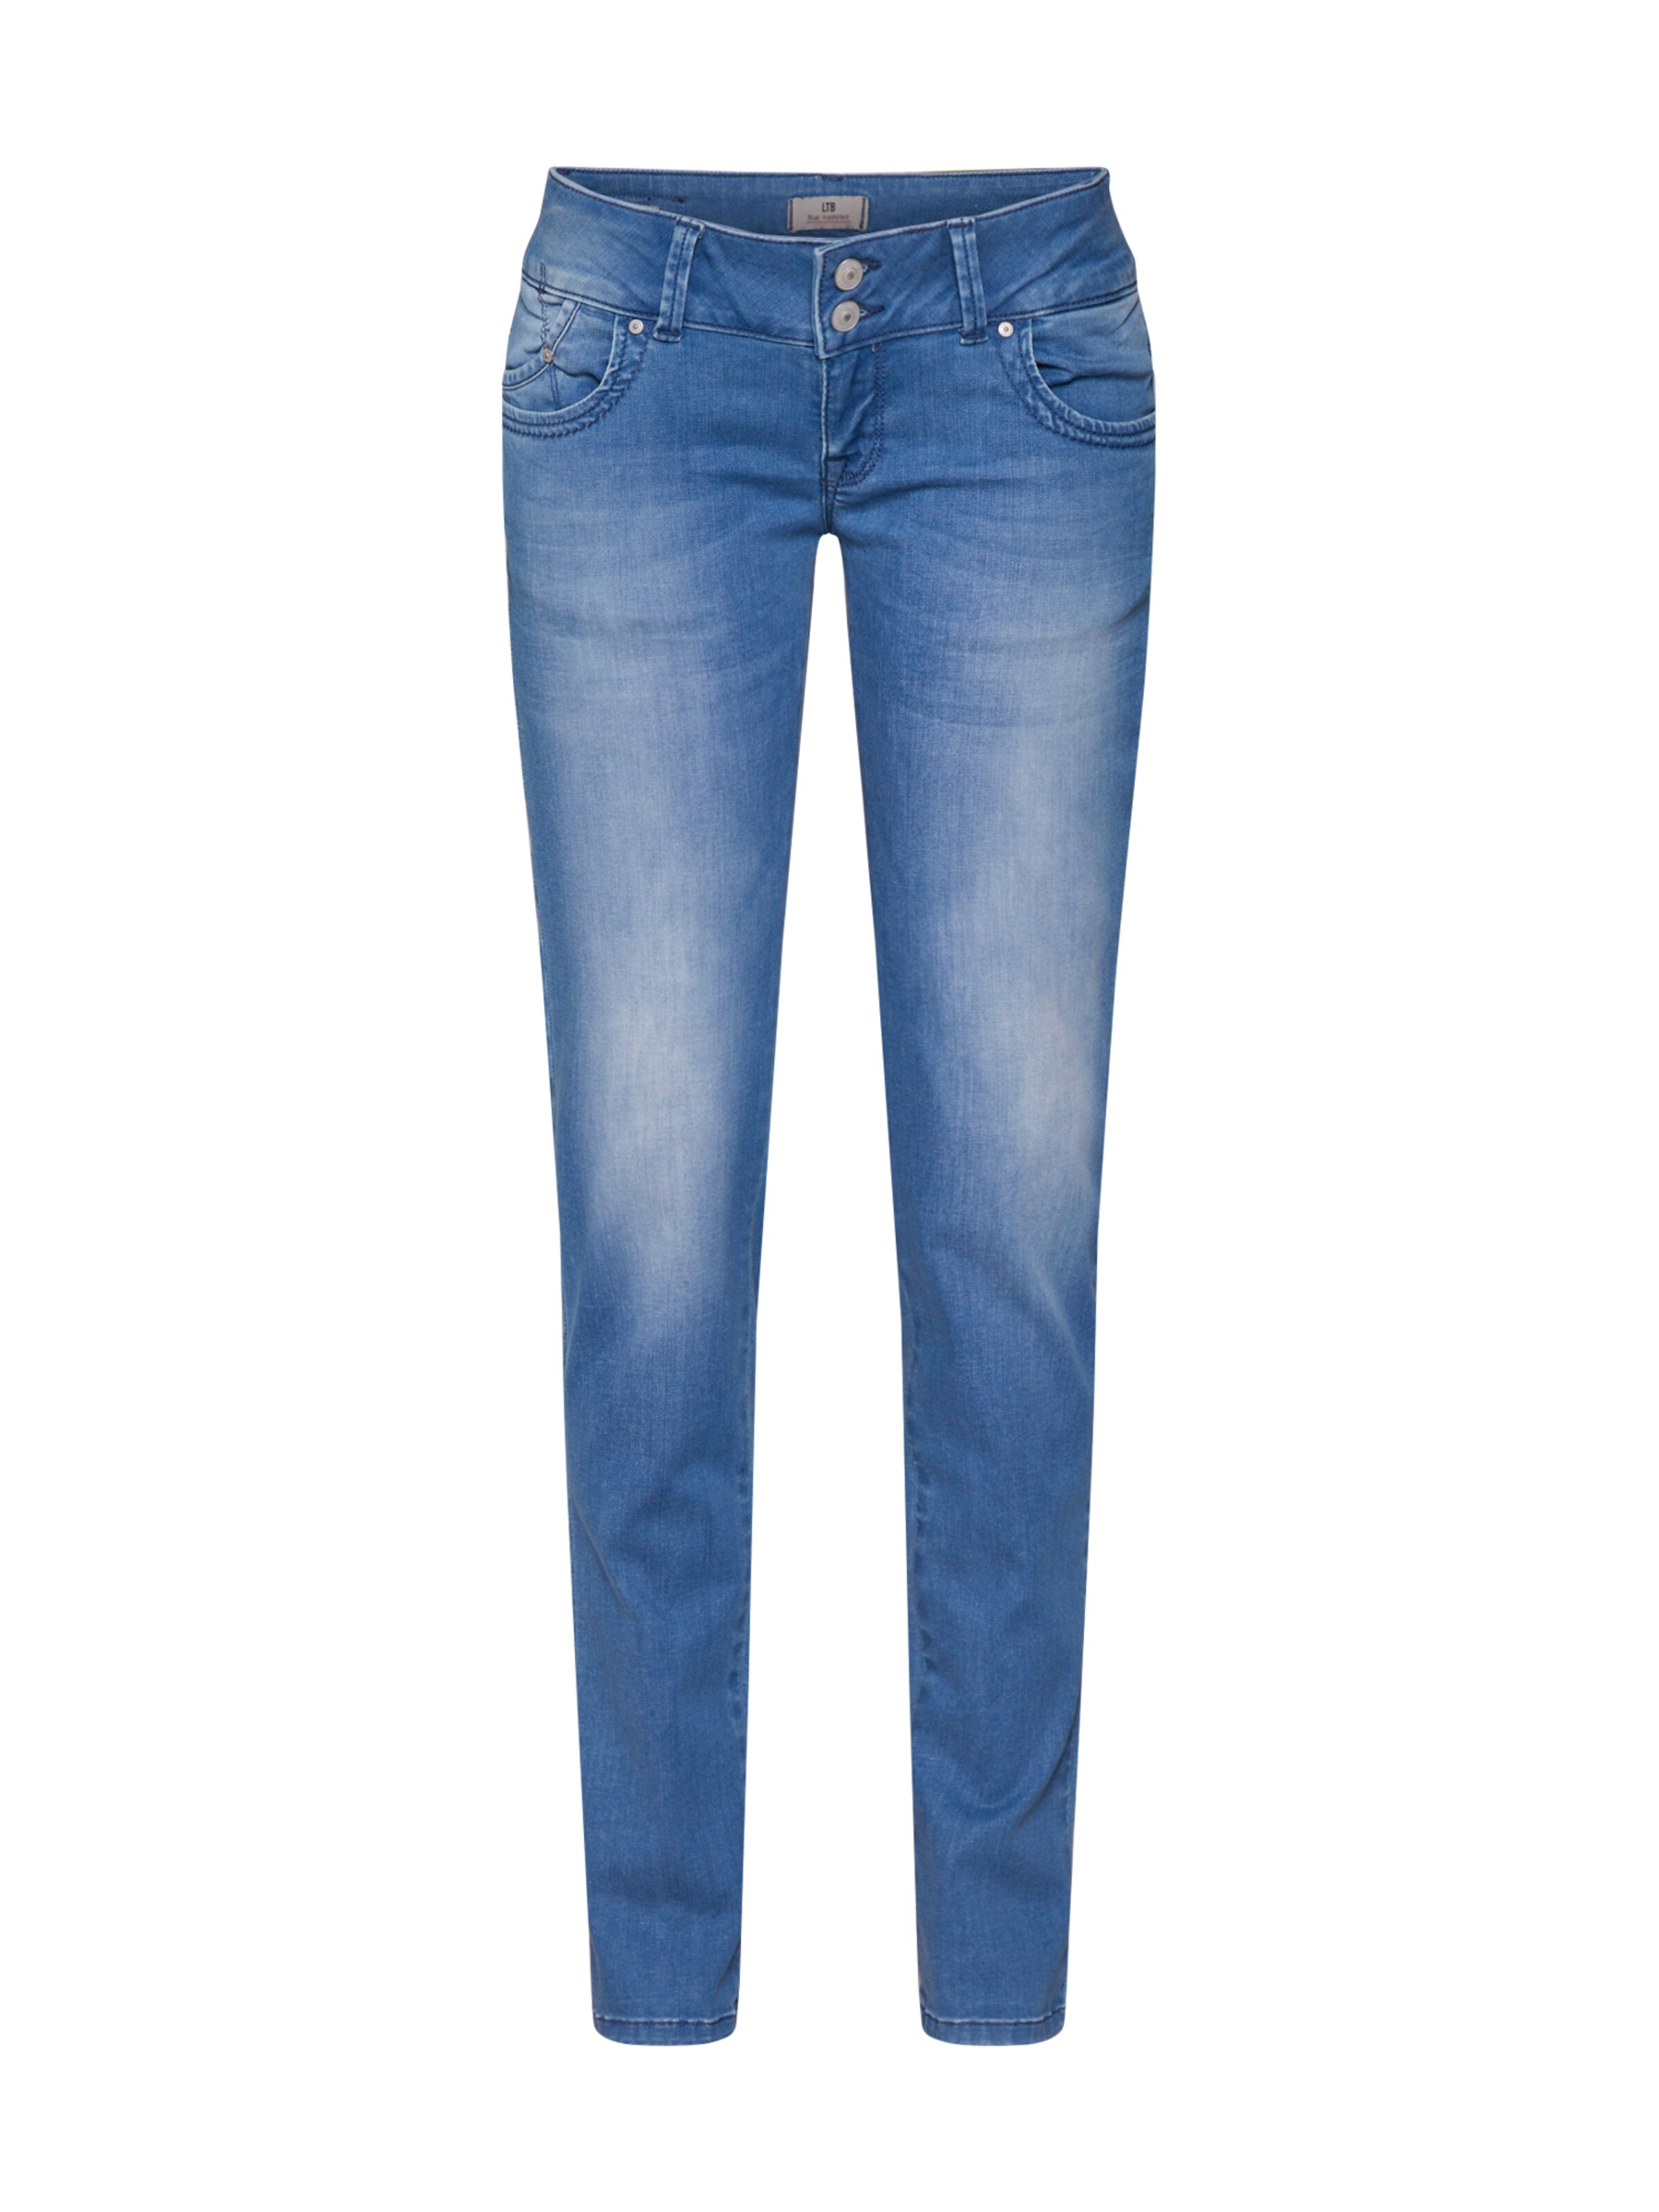 molly ltb jeans